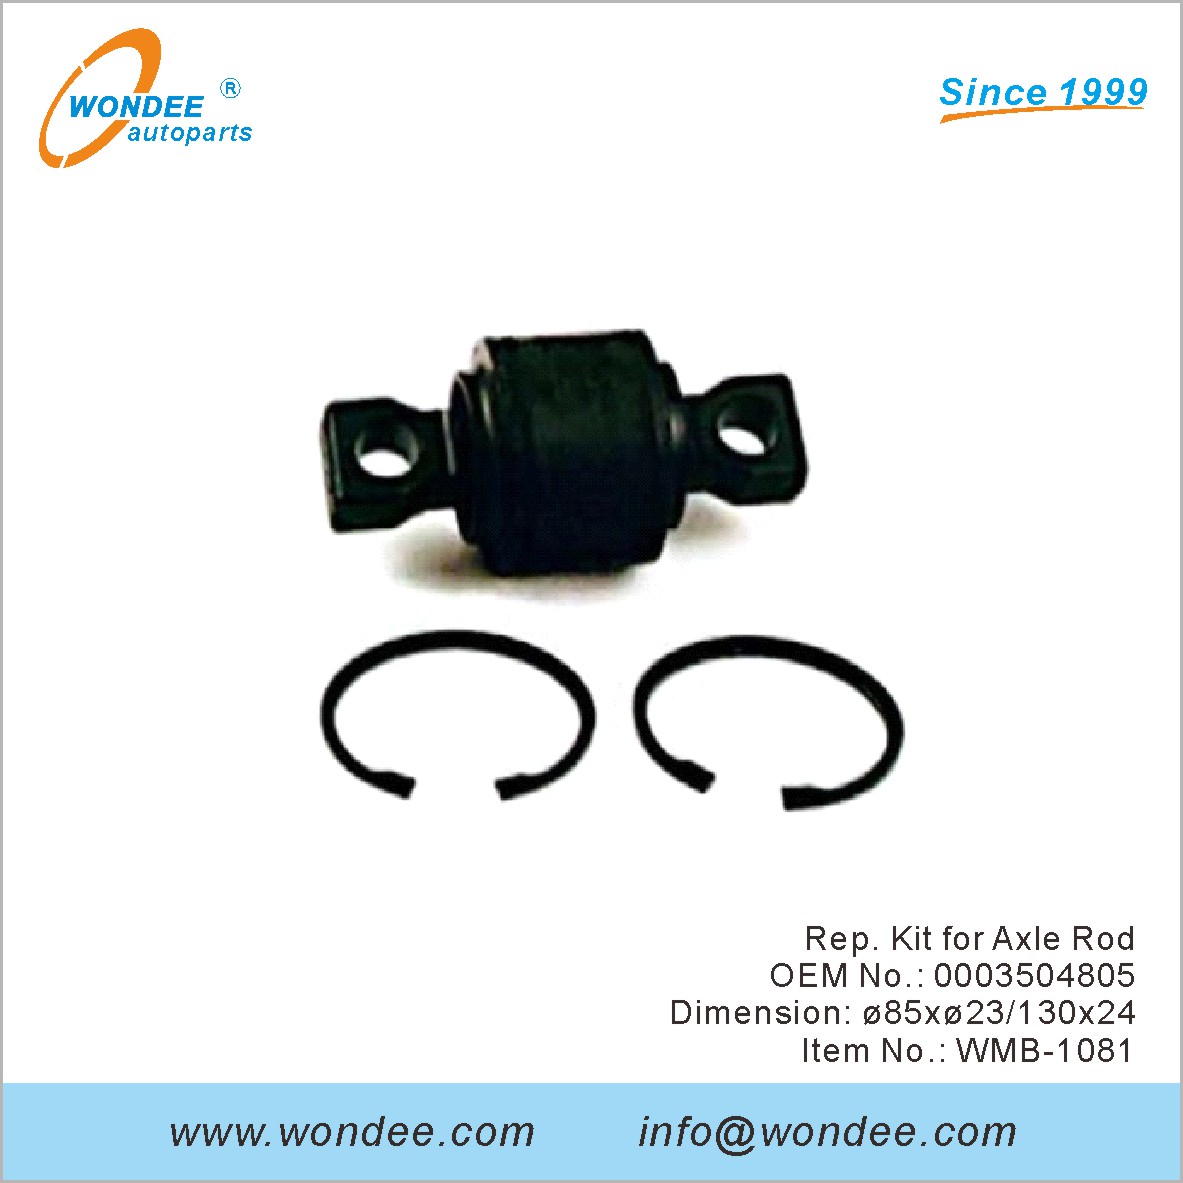 Rep. Kit for Axle Rod OEM 0003504805 for Benz from WONDEE